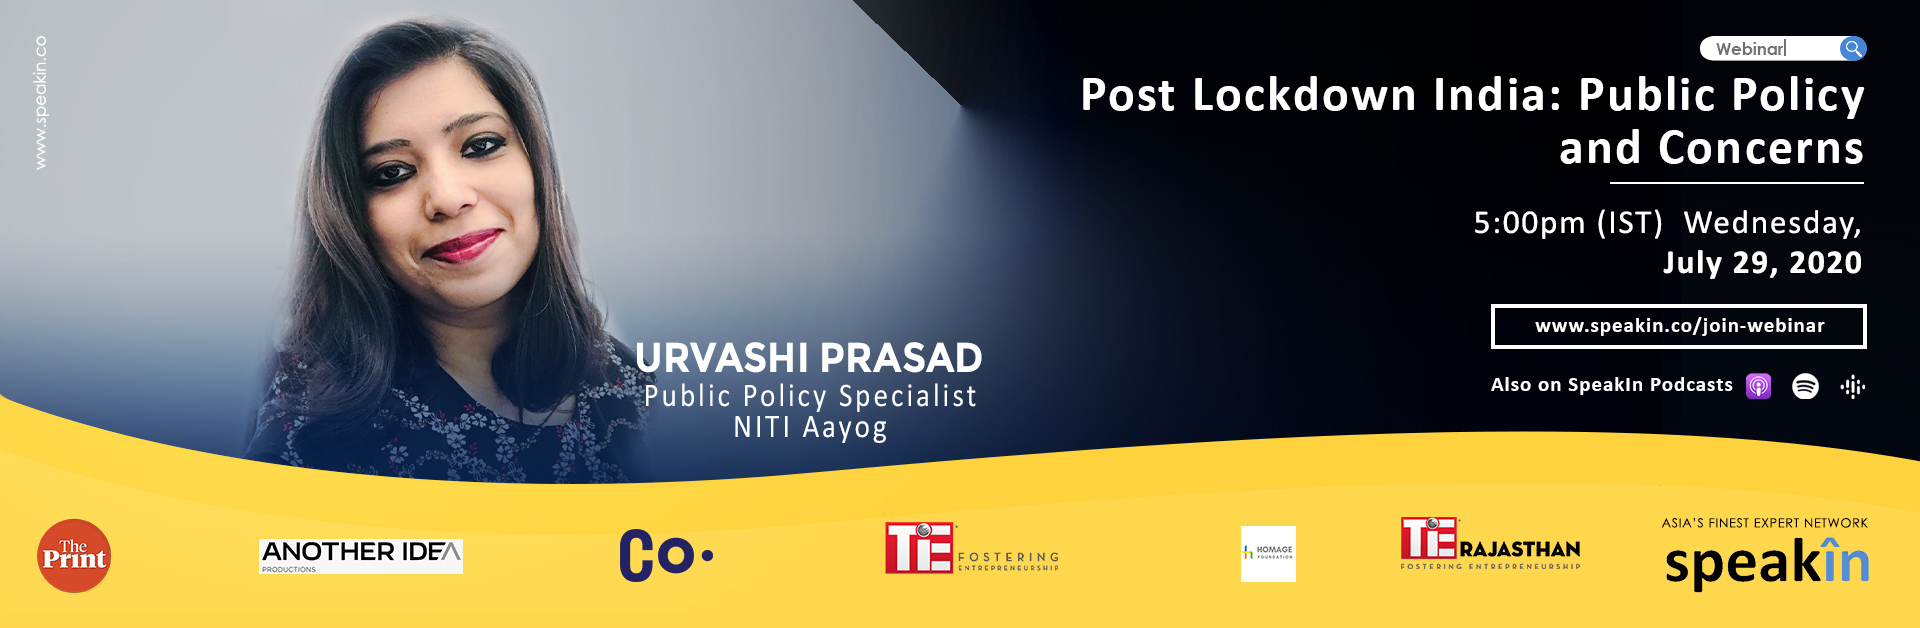 Post Lockdown India: Public Policy and Concerns